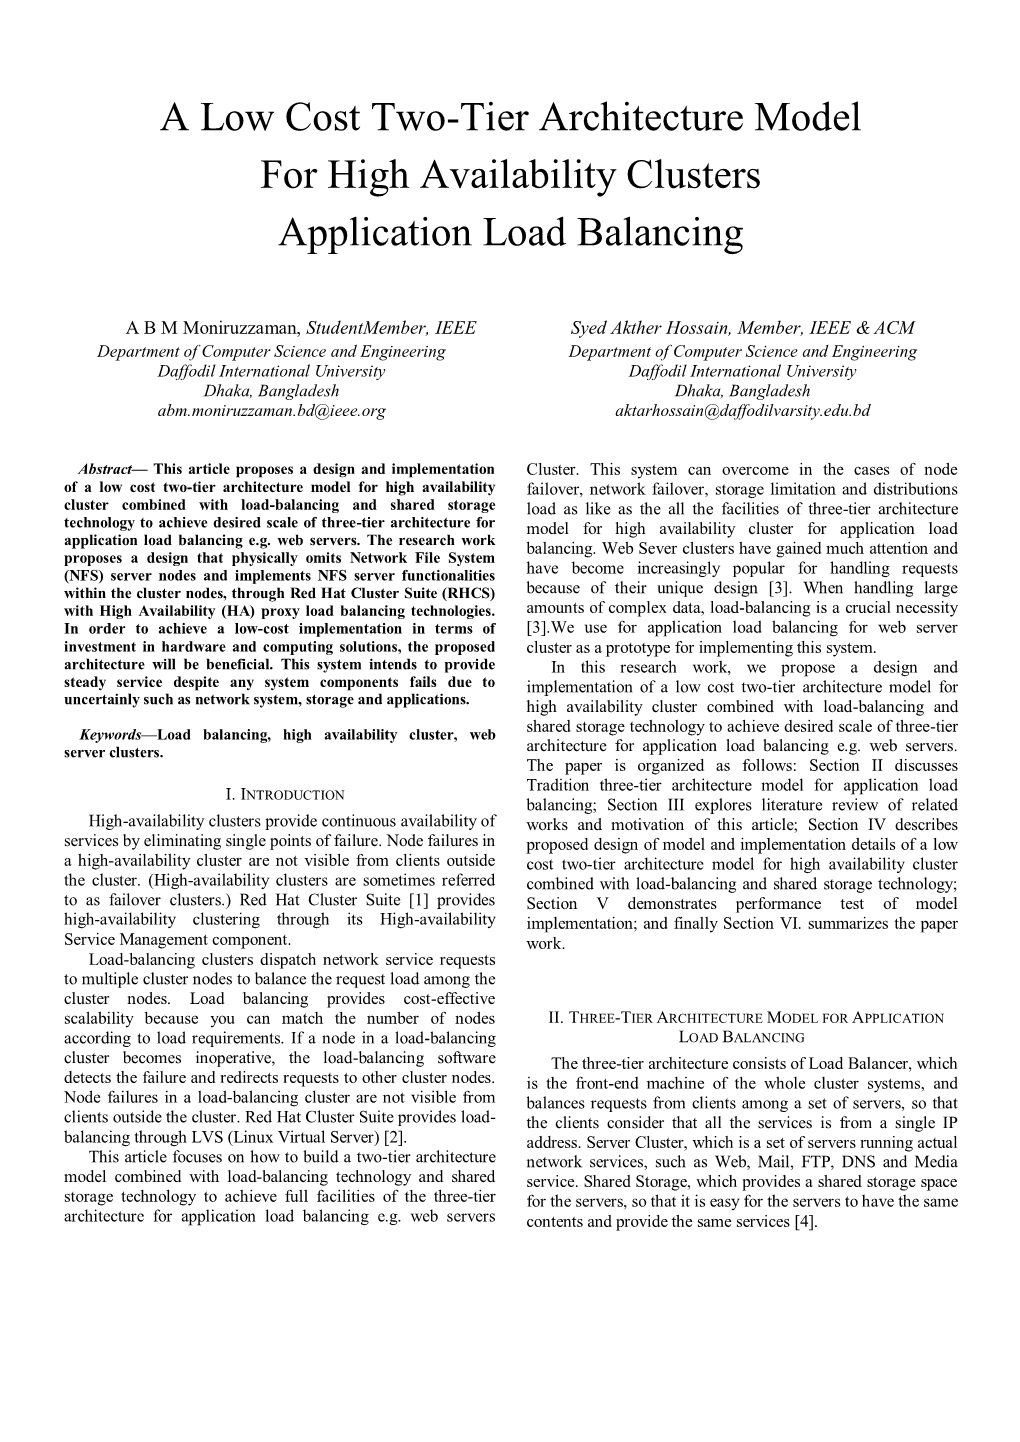 A Low Cost Two-Tier Architecture Model for High Availability Clusters Application Load Balancing